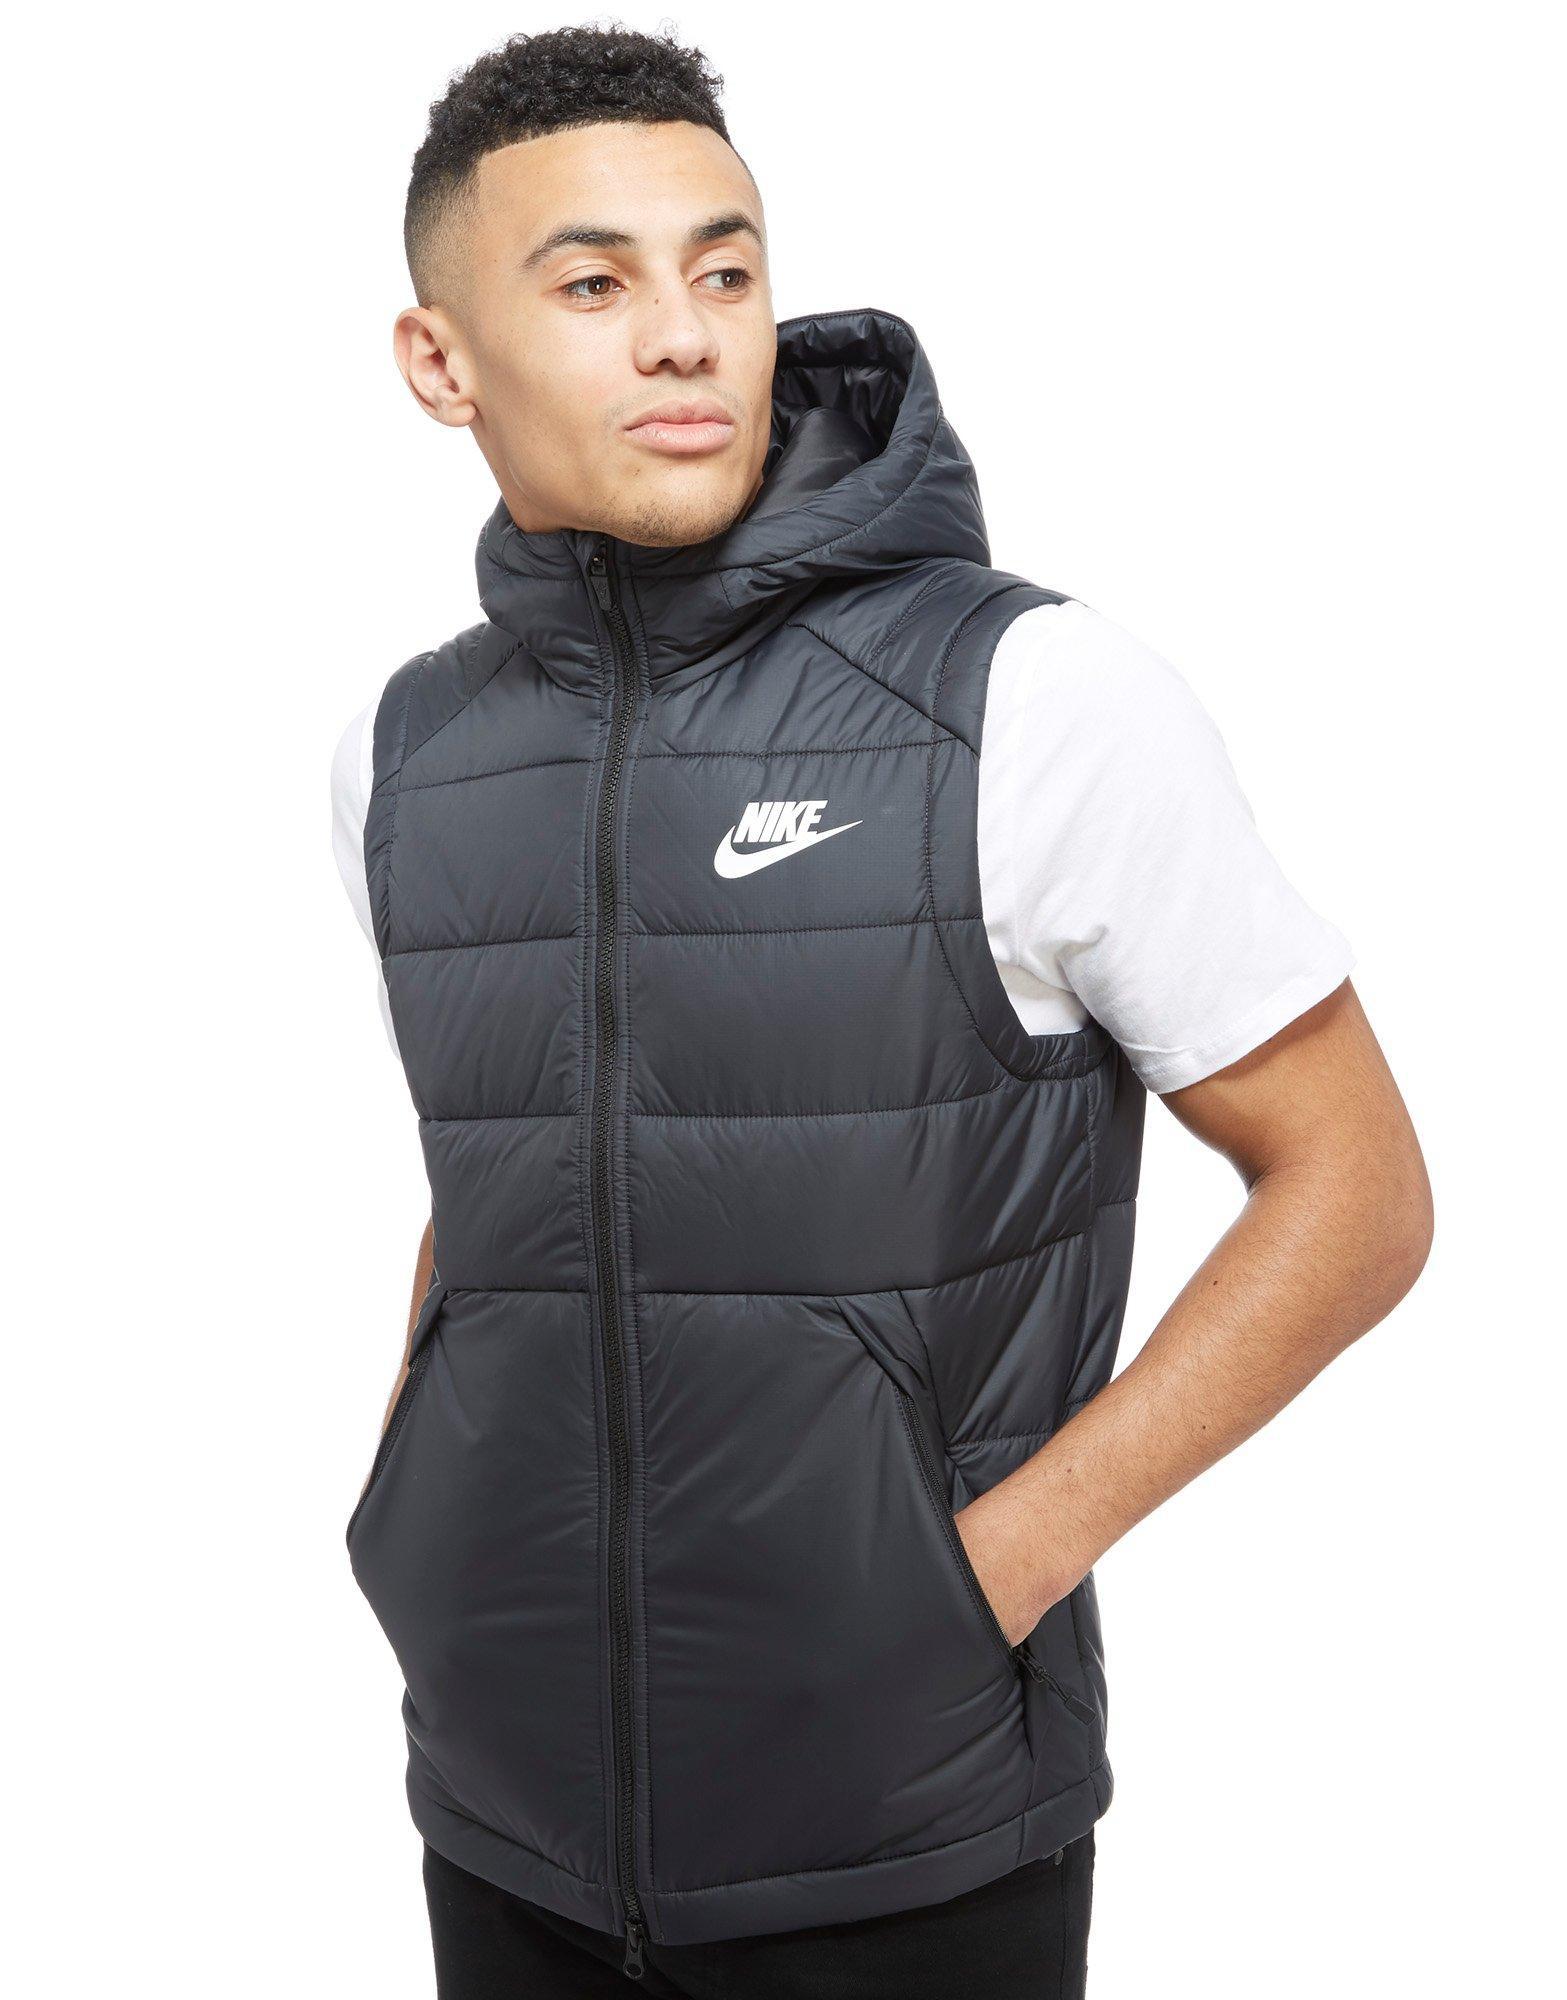 Mens Nike Hooded Gilet Discount, SAVE 31% - mpgc.net